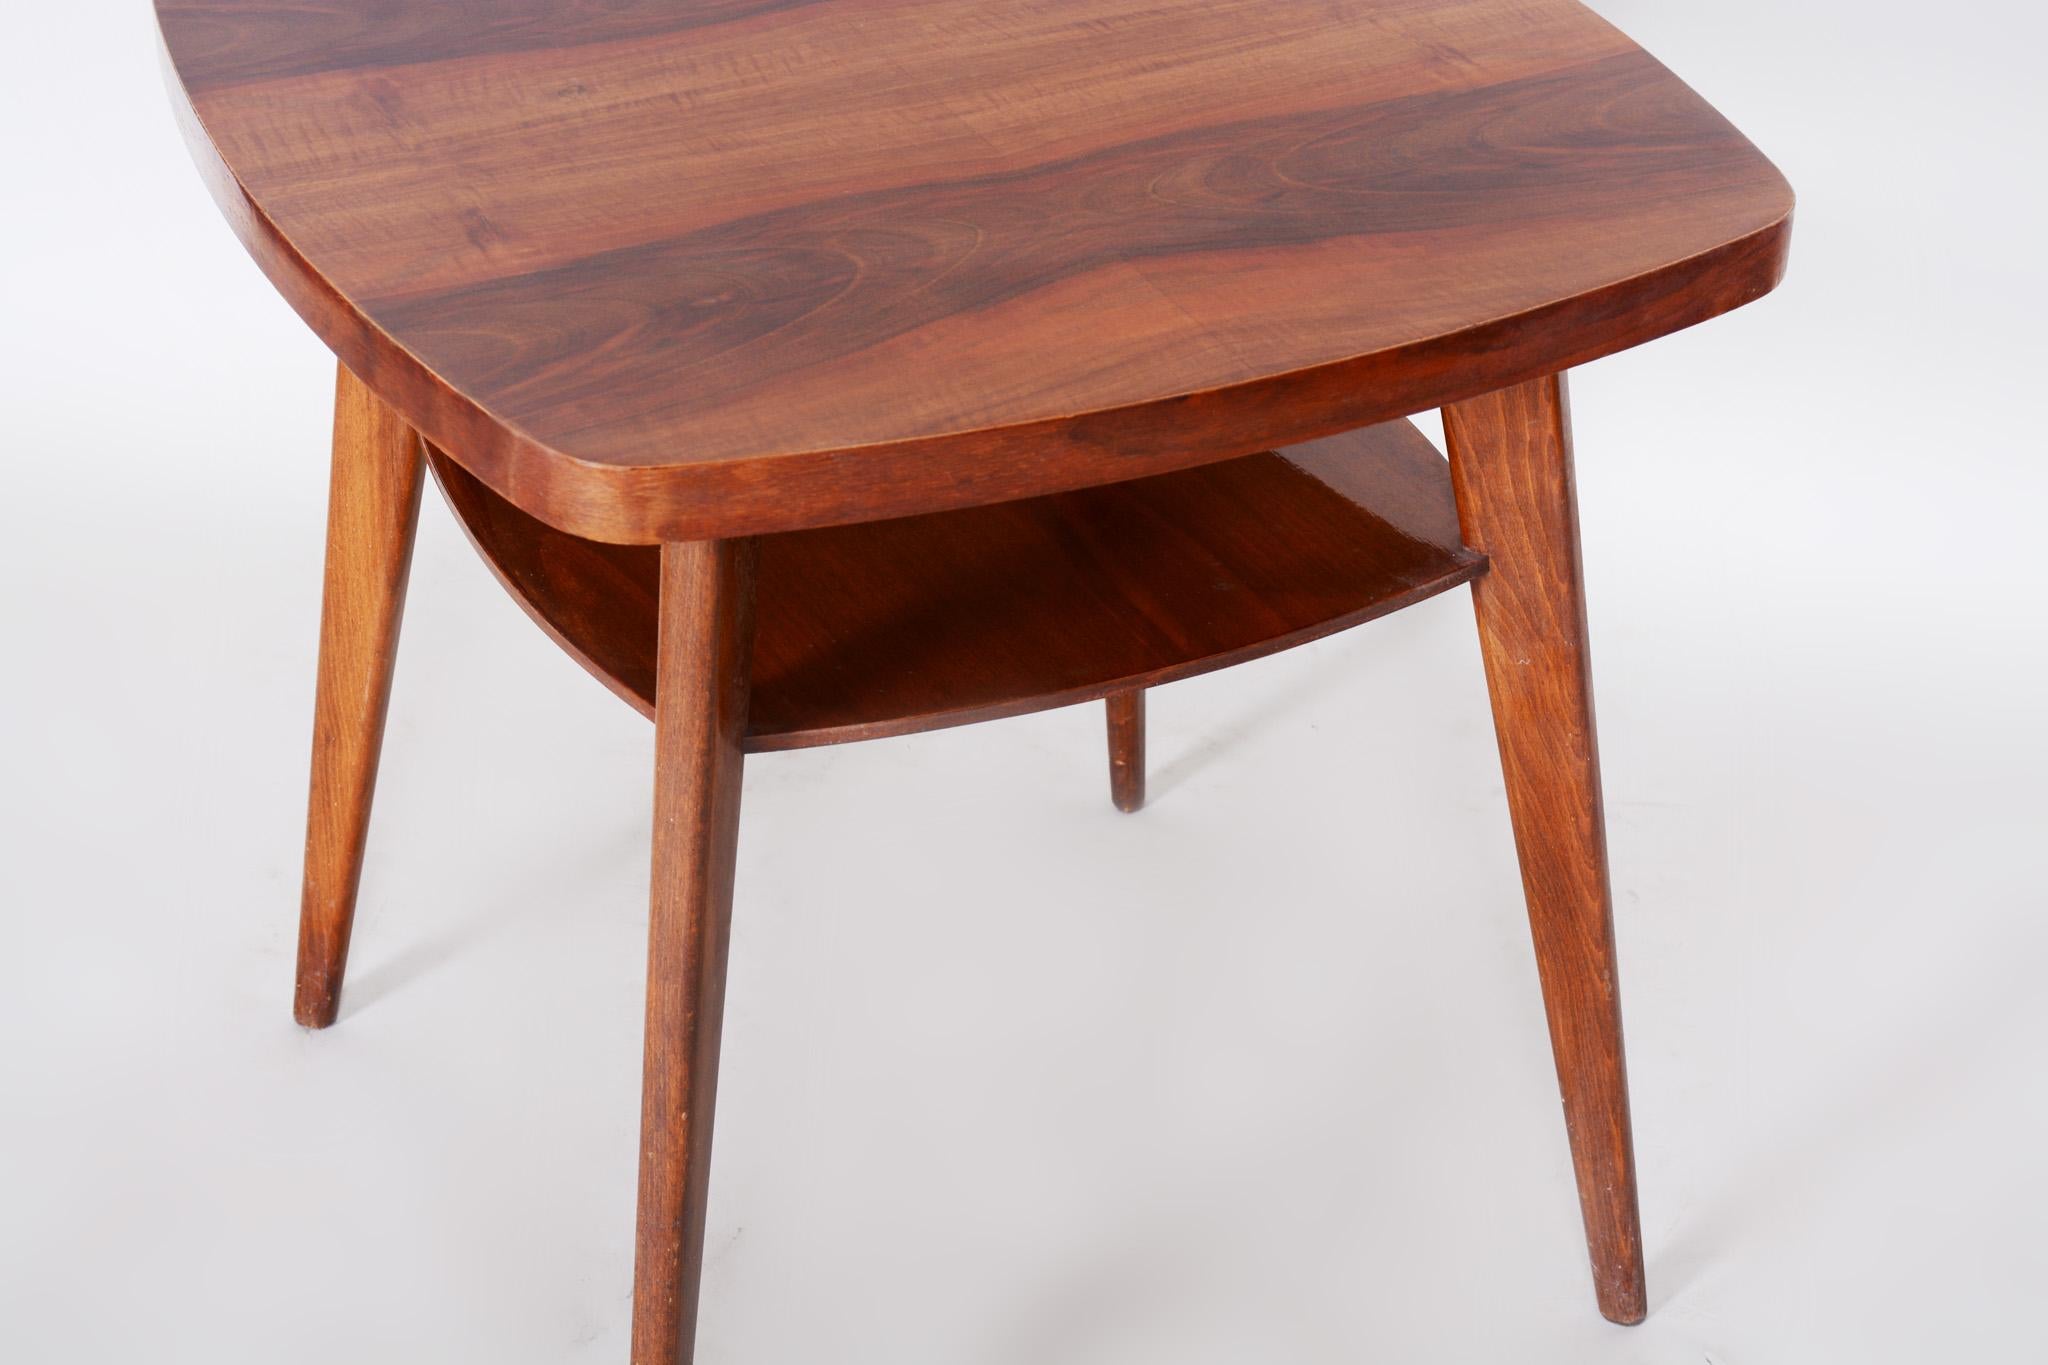 Wood Small Walnut Coffee Table, Czech Midcentury, Preserved Original Condition, 1950s